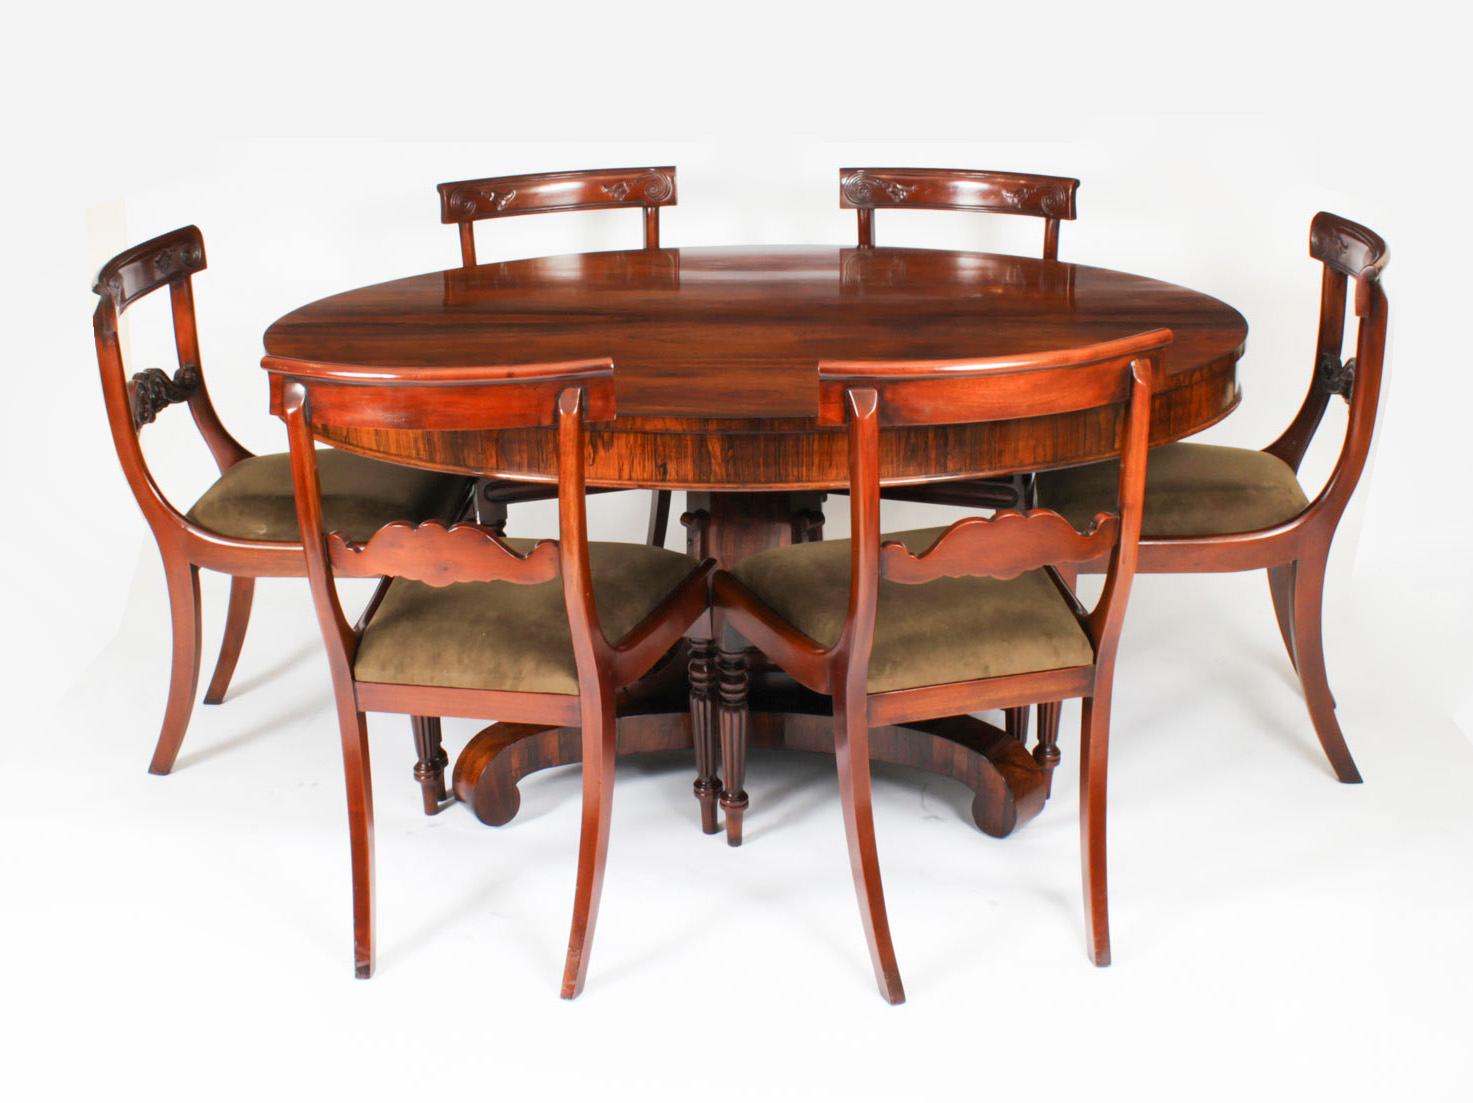 A stunning antique William IV Gonçalo Alves oval breakfast table / loo table, circa 1835 in date.

The lovely figured Gonçalo Alves oval top sits on a decorative and detailed four form base, and can seat six people in comfort.  It has a tilt top